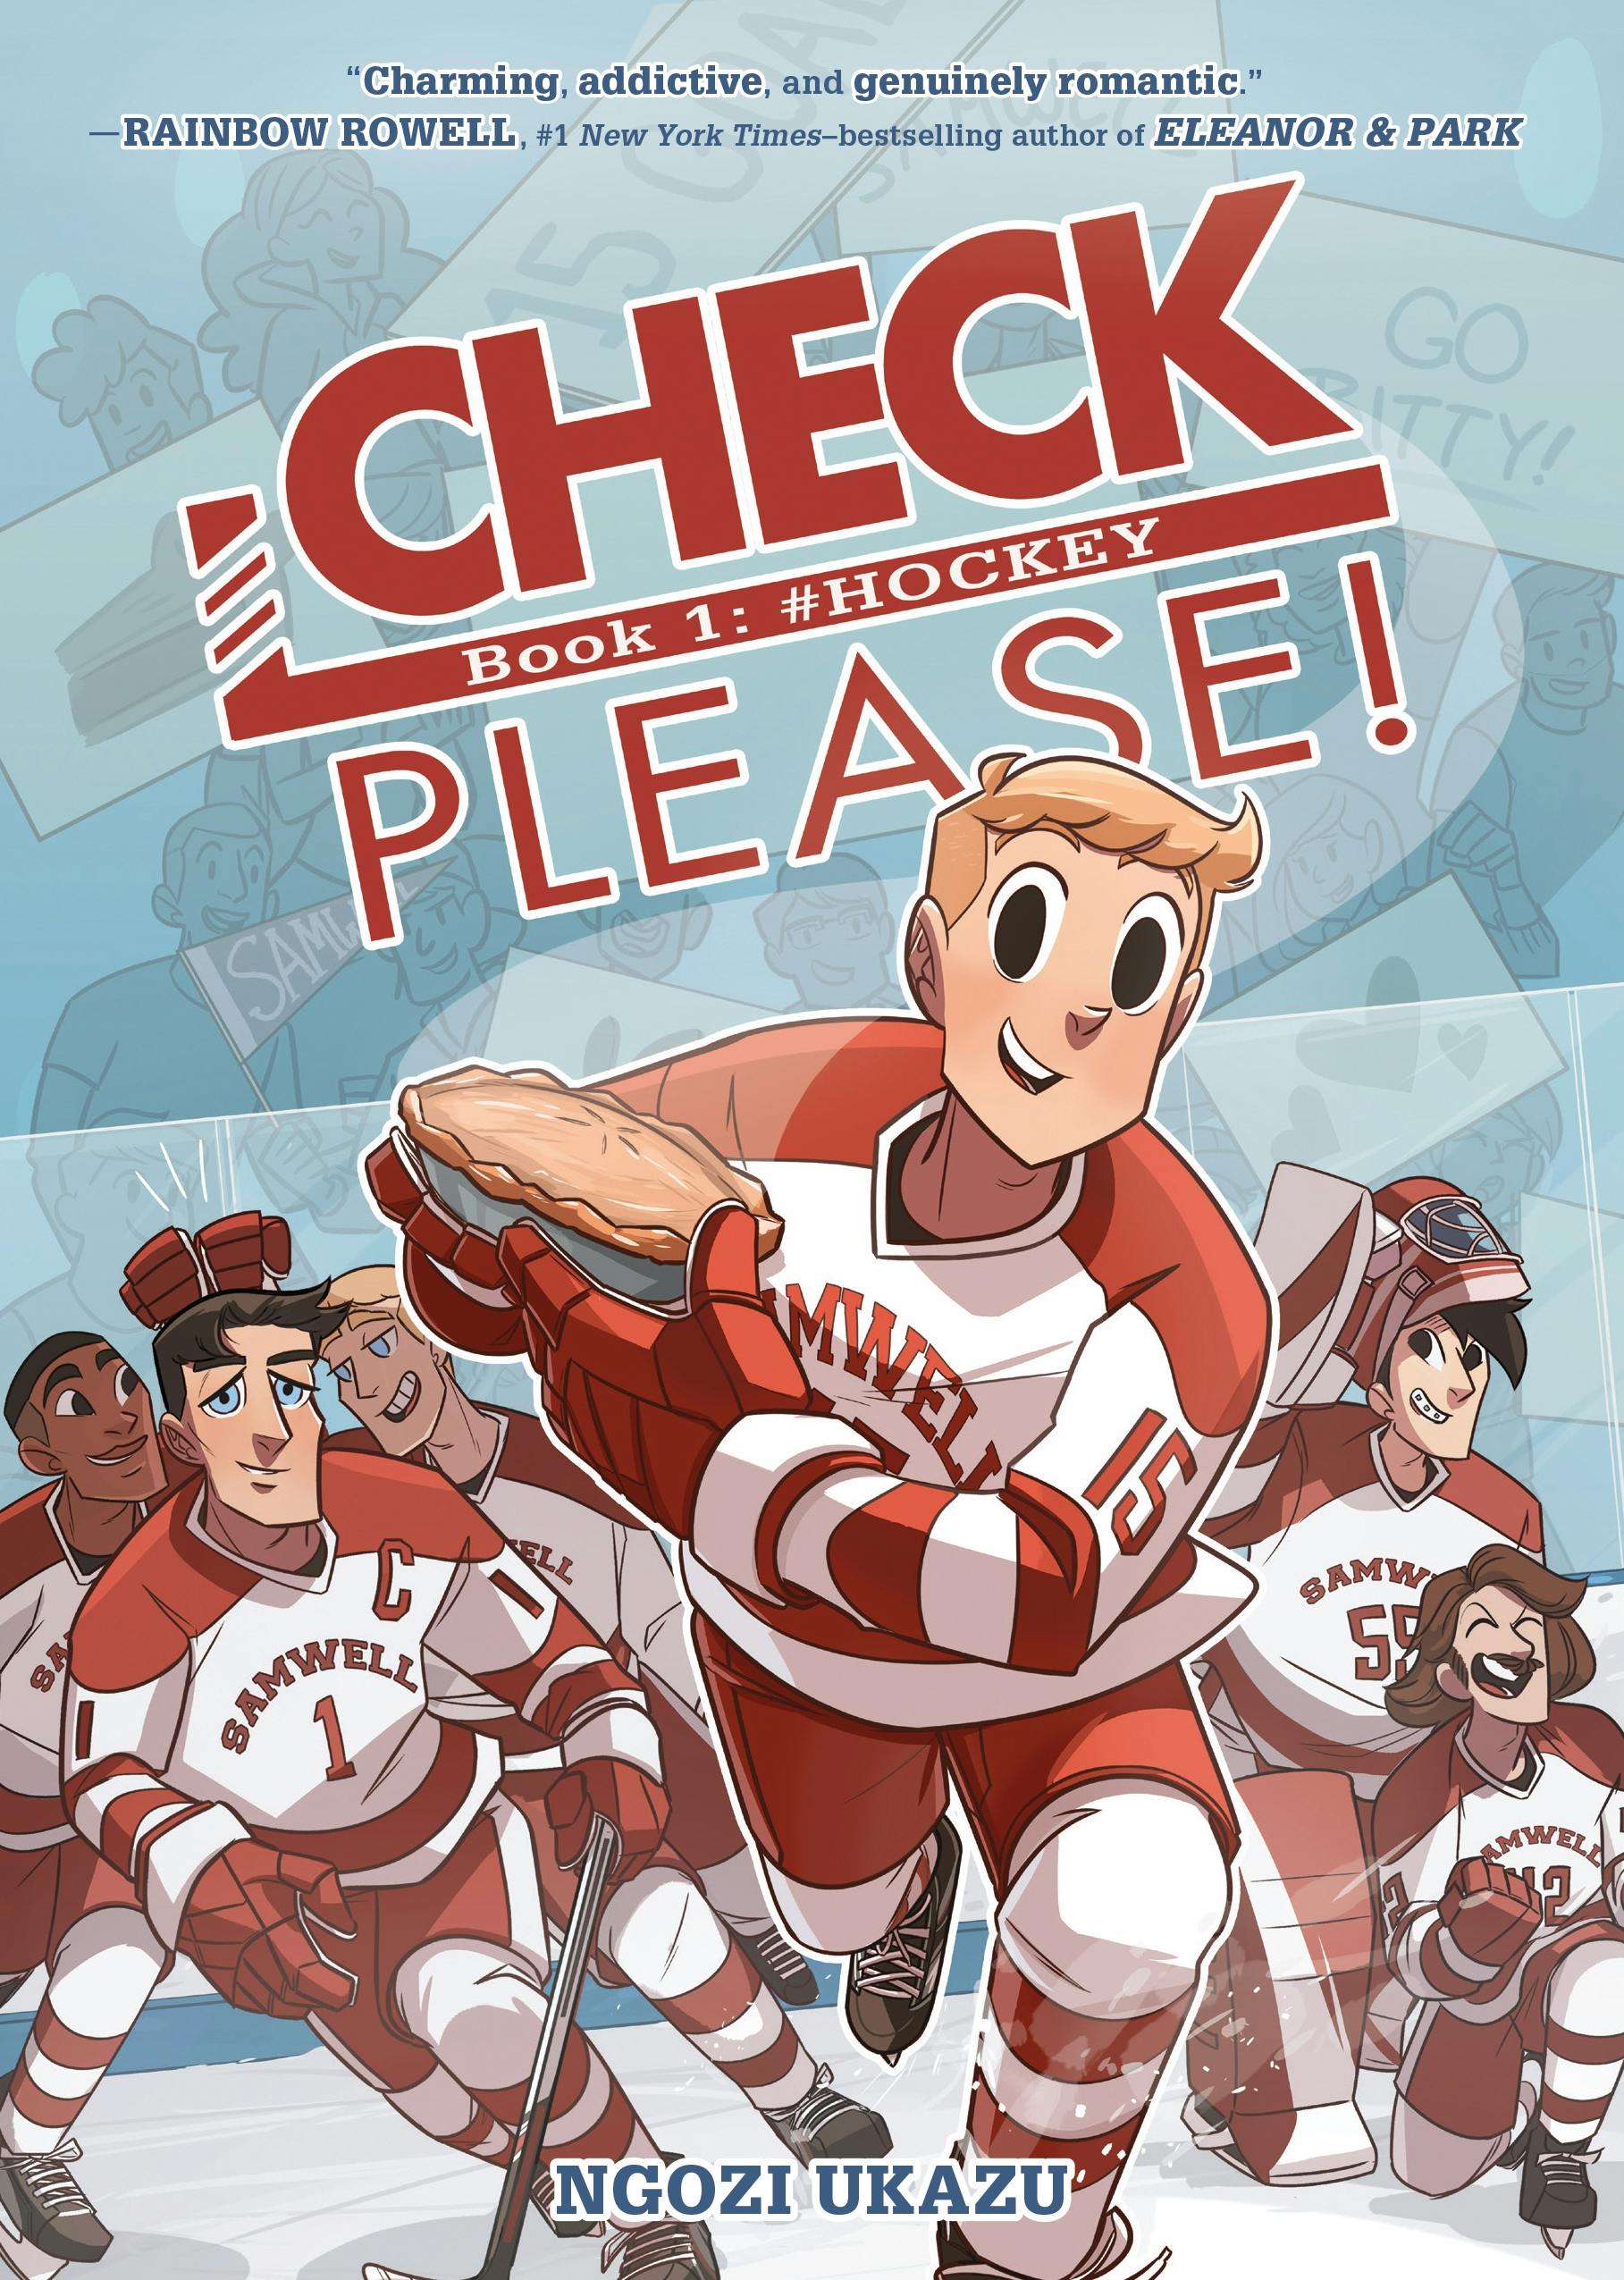 Image of Check, Please! Book 1: # Hockey